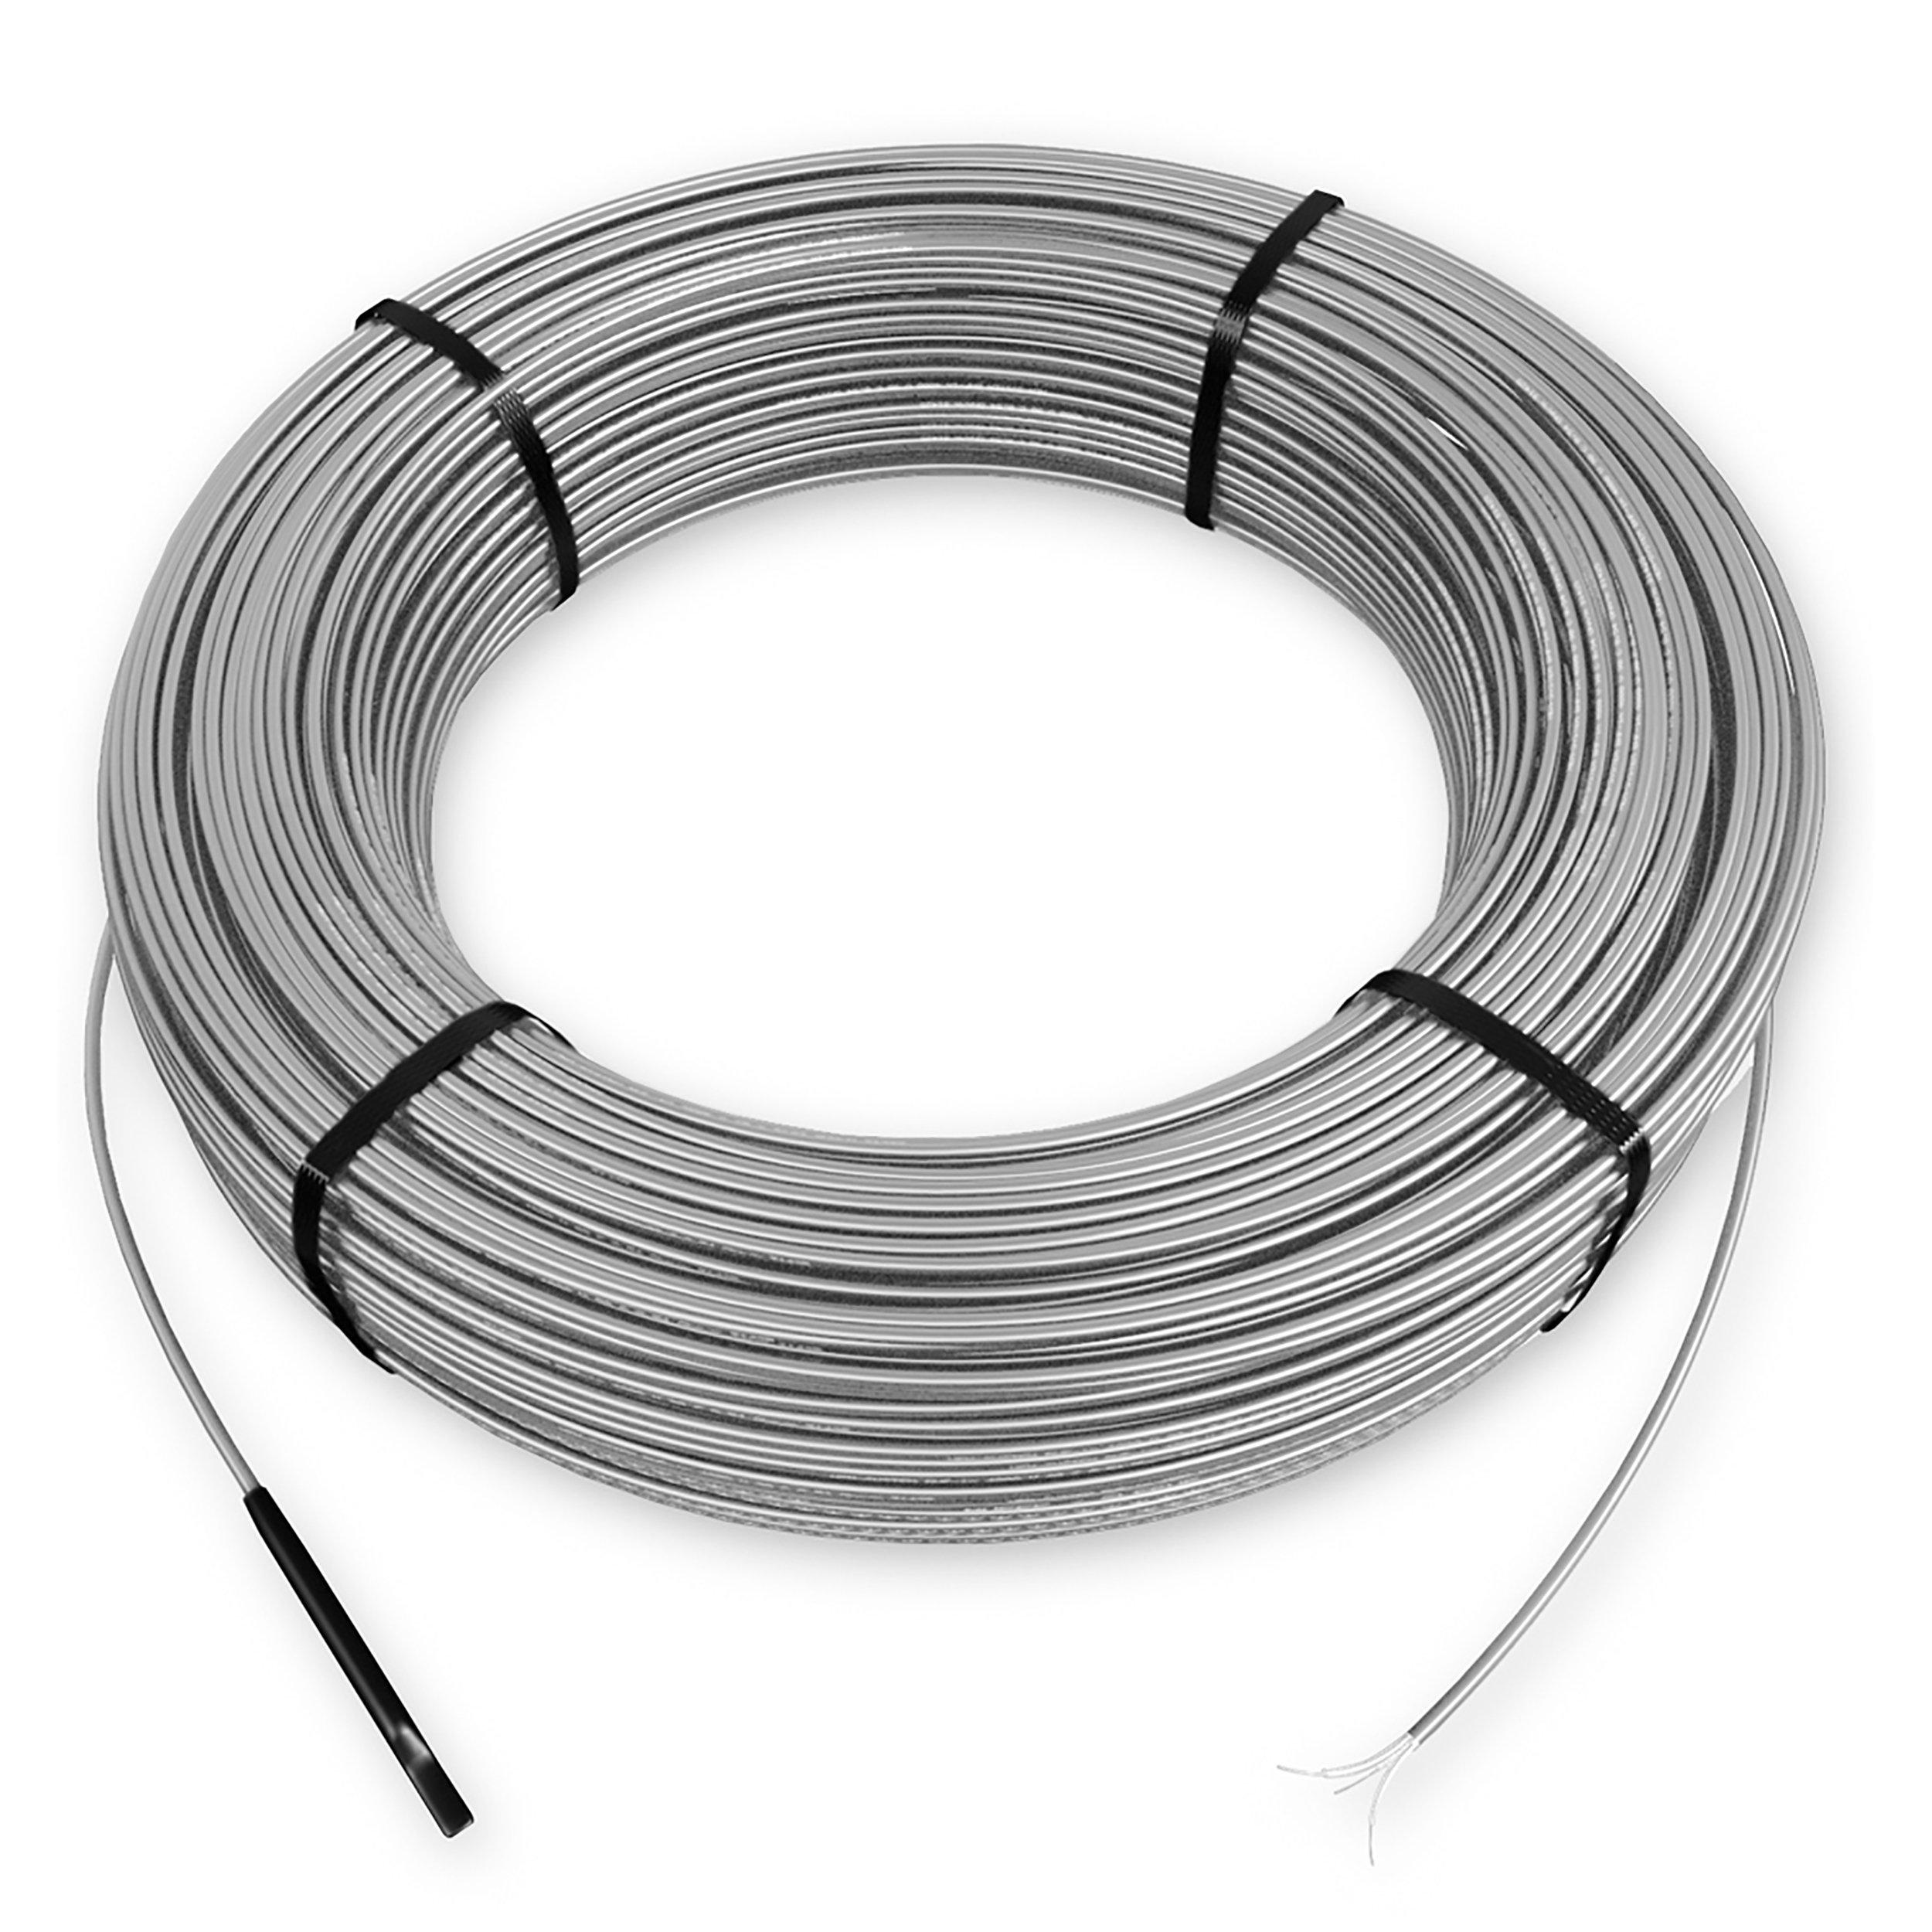 Schluter 64.4sqft. Ditra Heat 120V Heating Cable